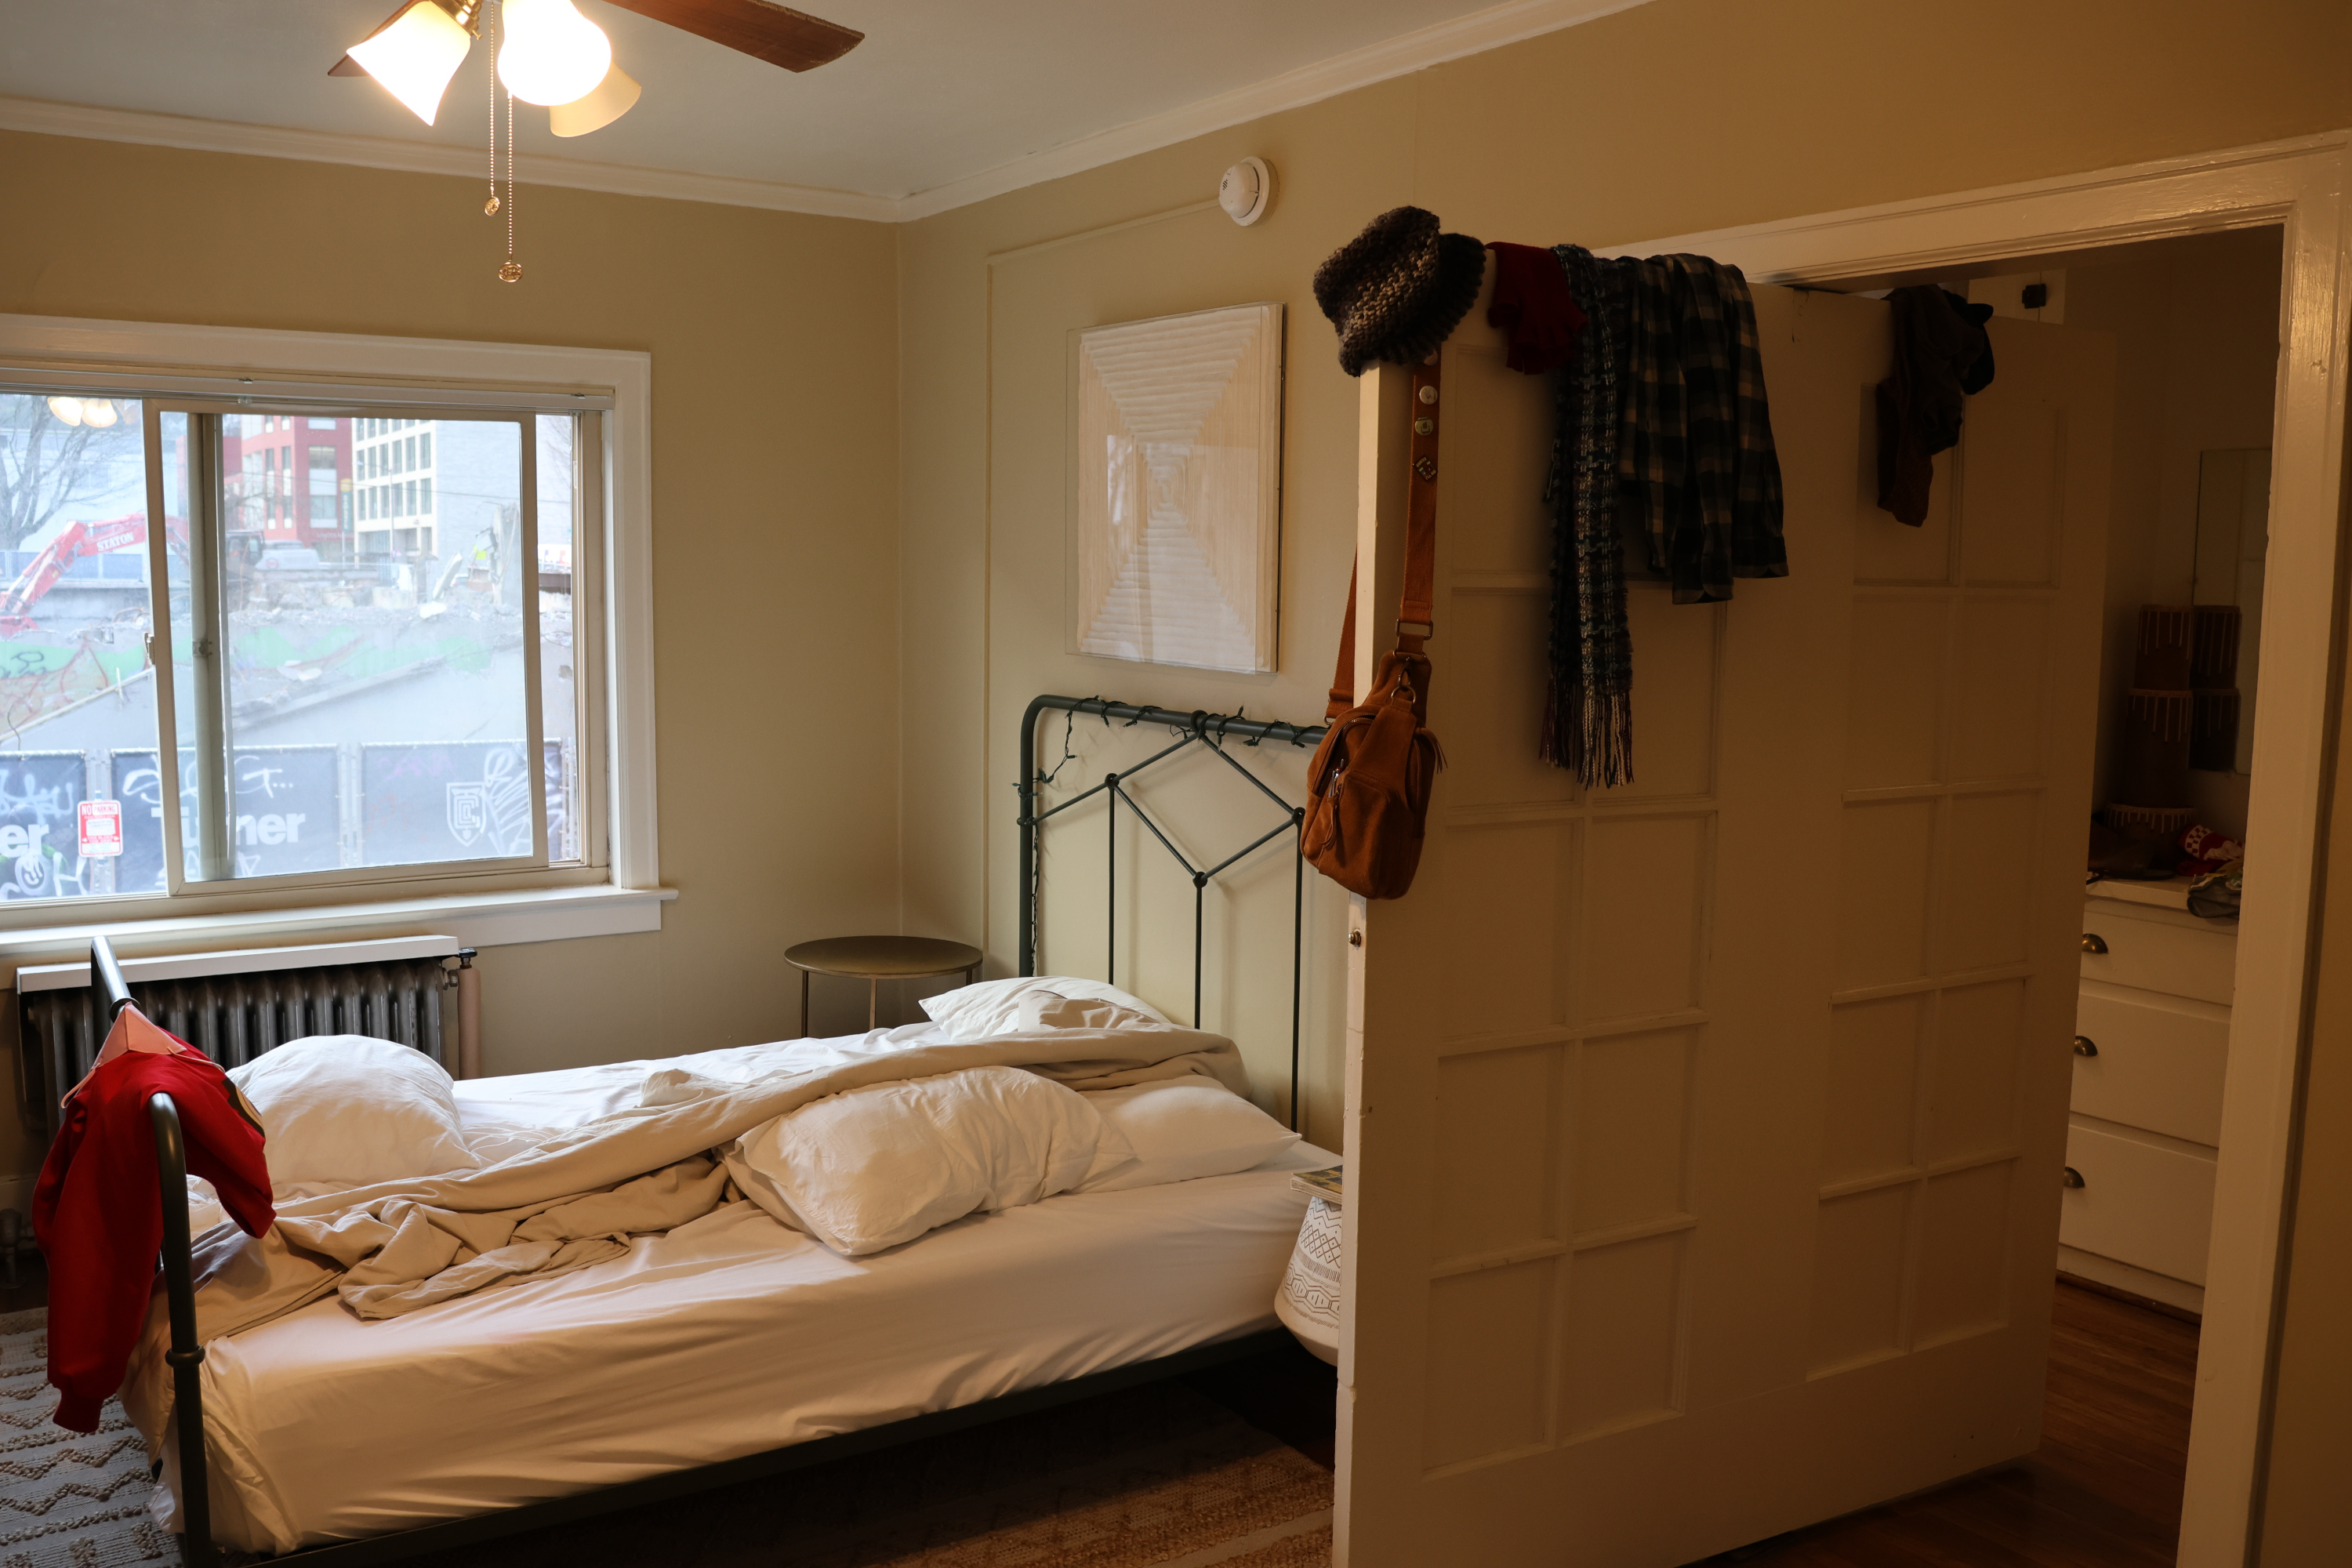 Photo of a small apartment. In frame is a slept-in bed, and a double-width door which rotates around a pivot at its center. We've got it fully open now, and our clothes are hanging on it.